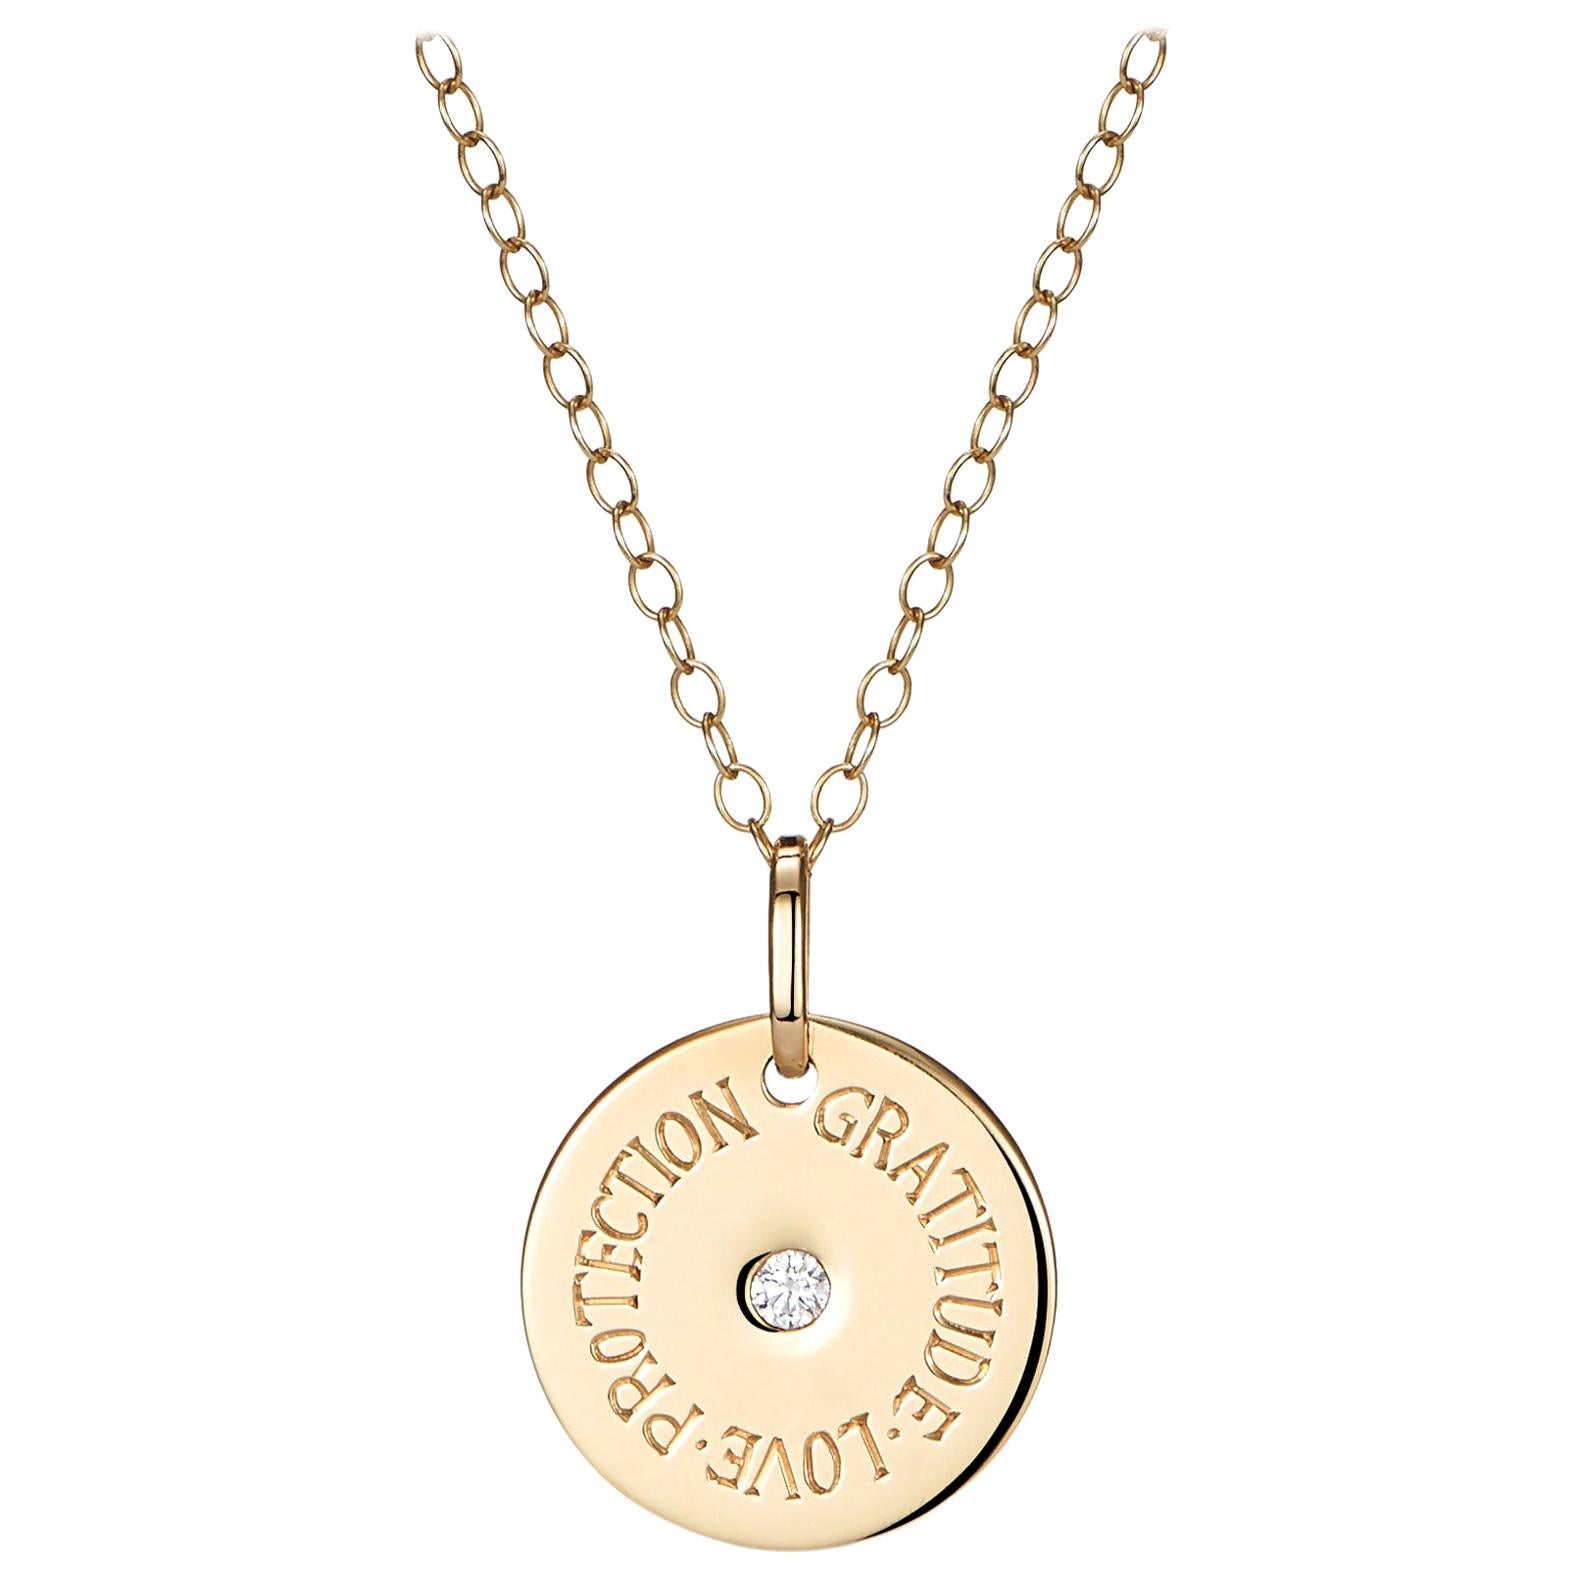 Gold Mantra Engraved Necklace With White Diamond Charm